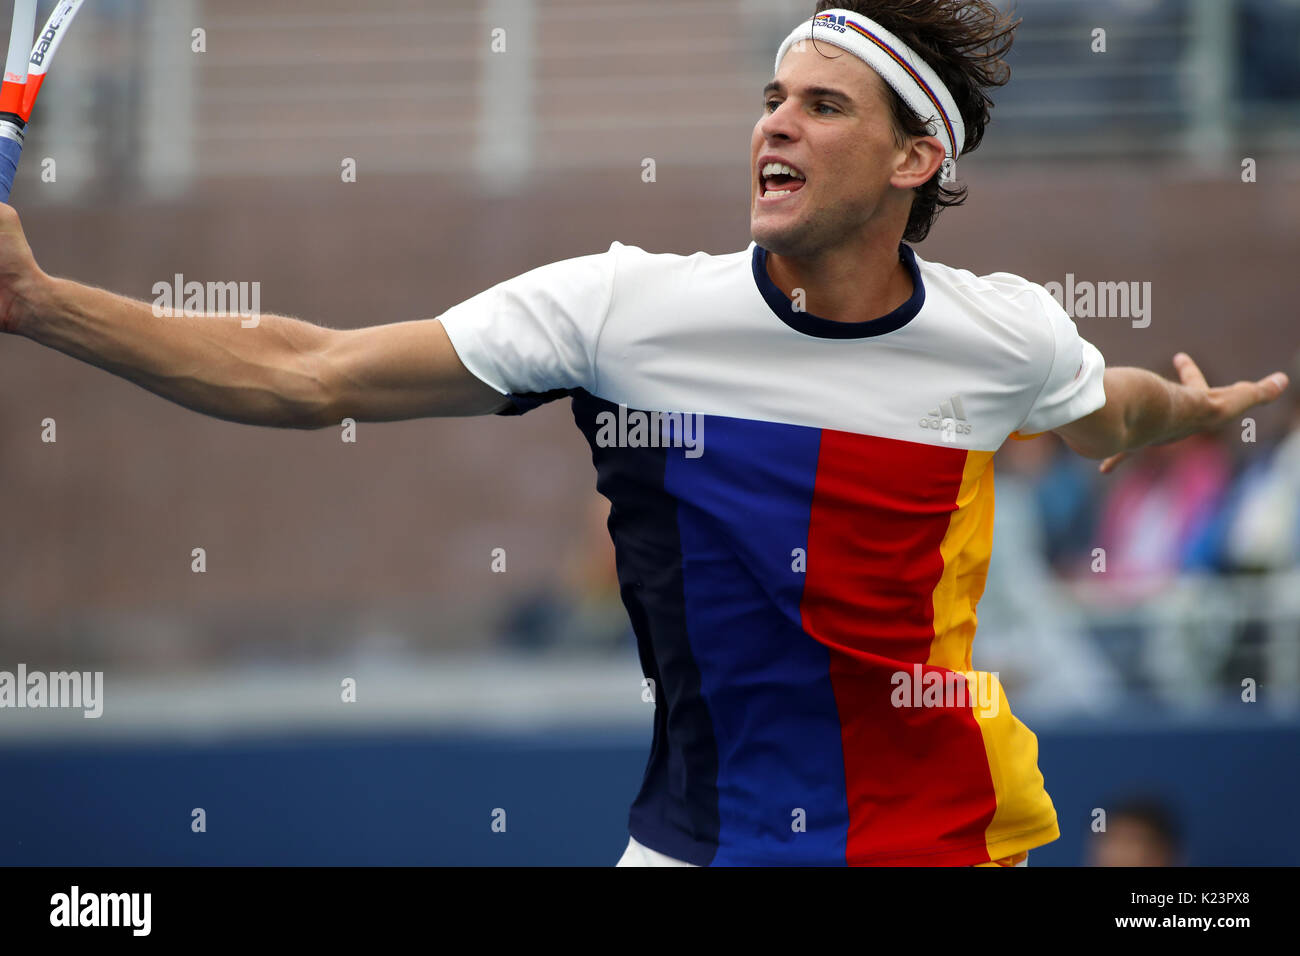 New York, United States. 29th Aug, 2017. US Open Tennis: New York, 29 August, 2017 -Dominic Thiem of Austria in action against Alex de Minaur of Australia during their first round match at the US Open in Flushing Meadows, New York. Credit: Adam Stoltman/Alamy Live News Stock Photo